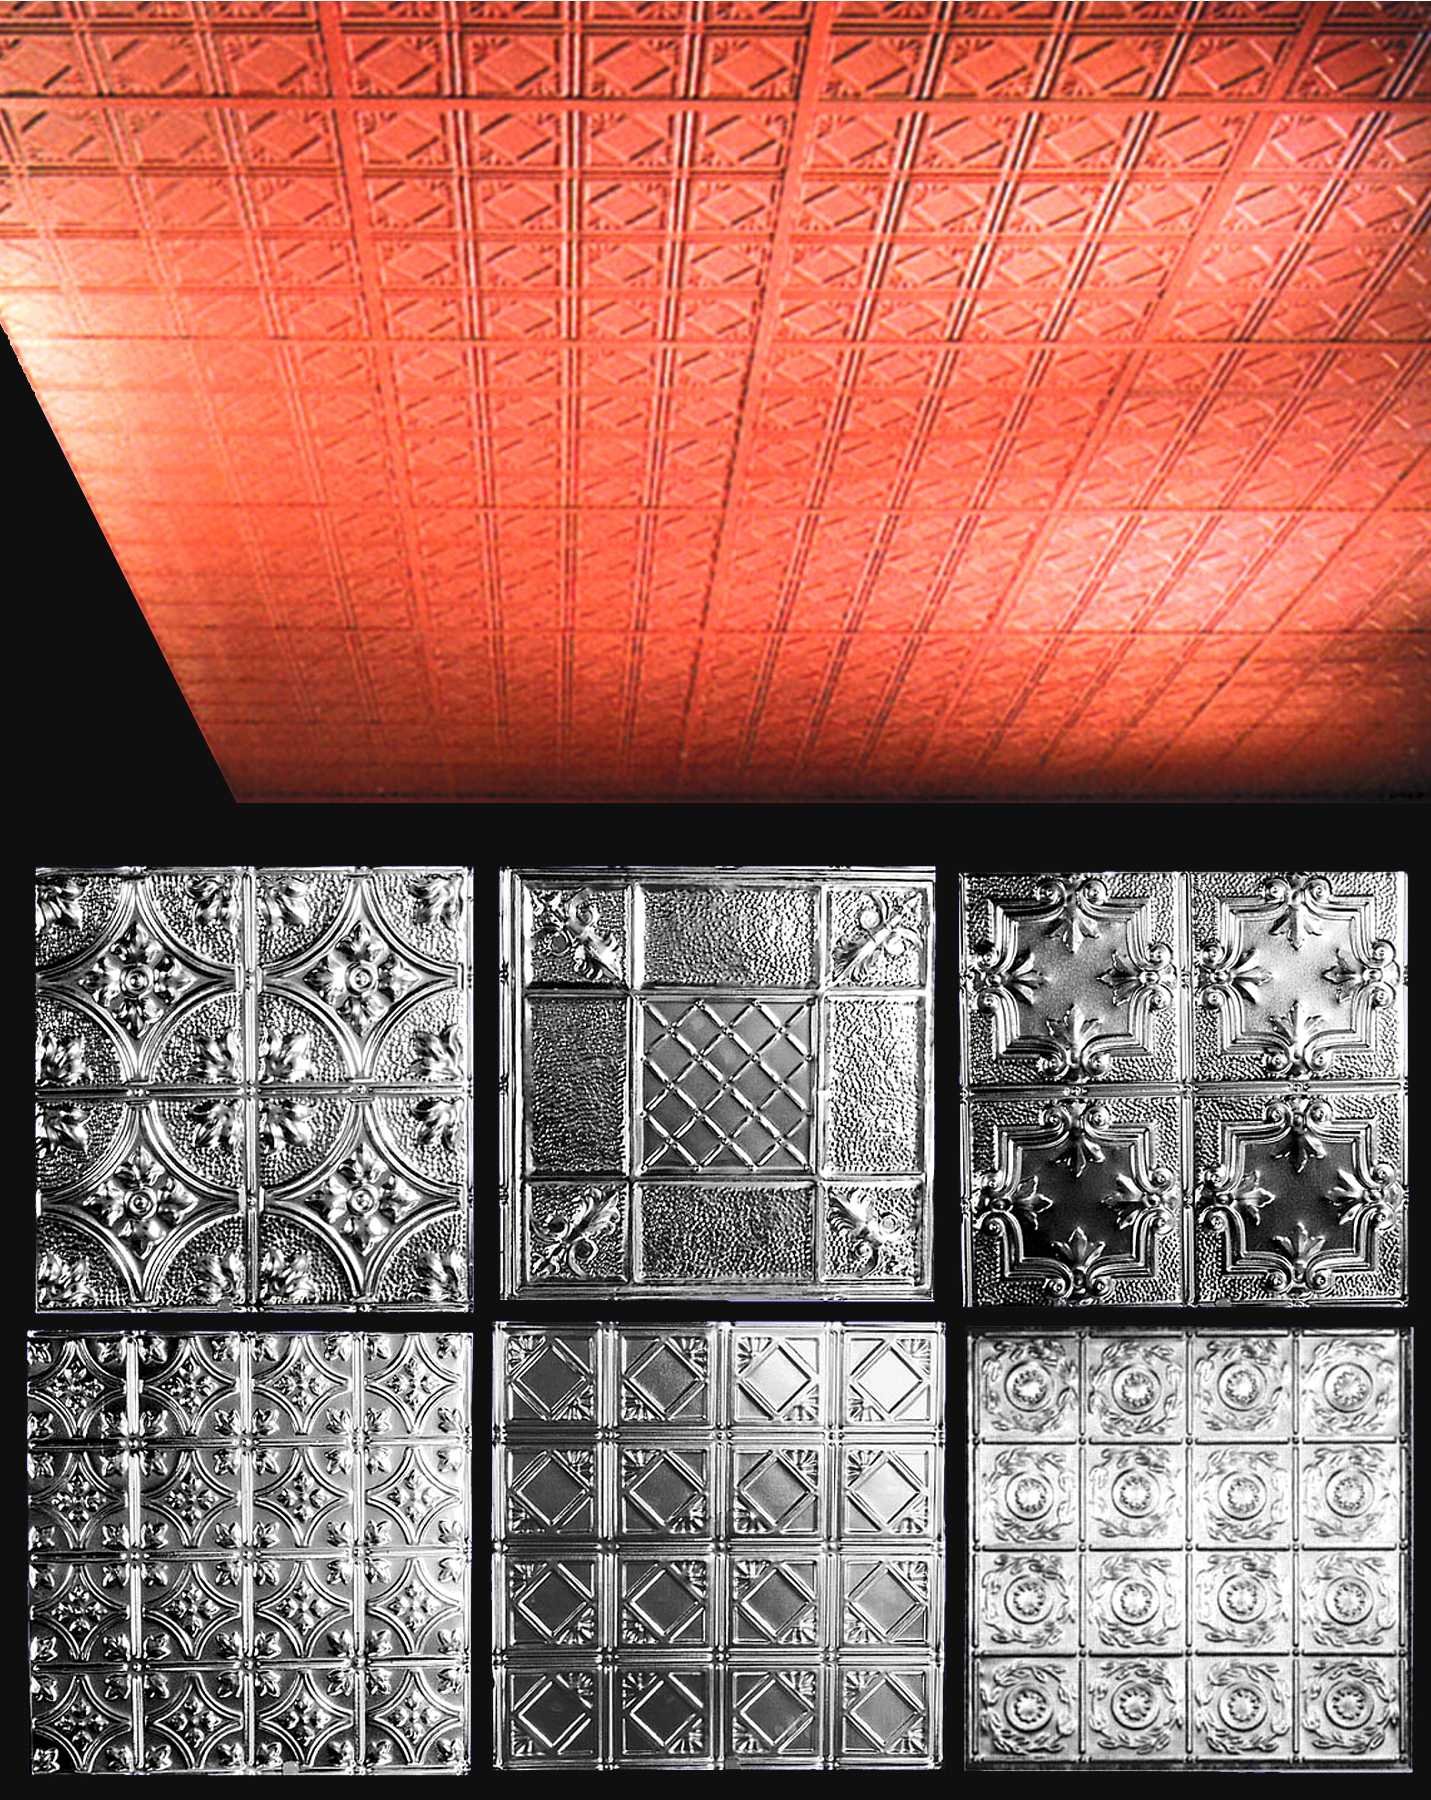 Outwater's Stamped Steel Ceiling Panels